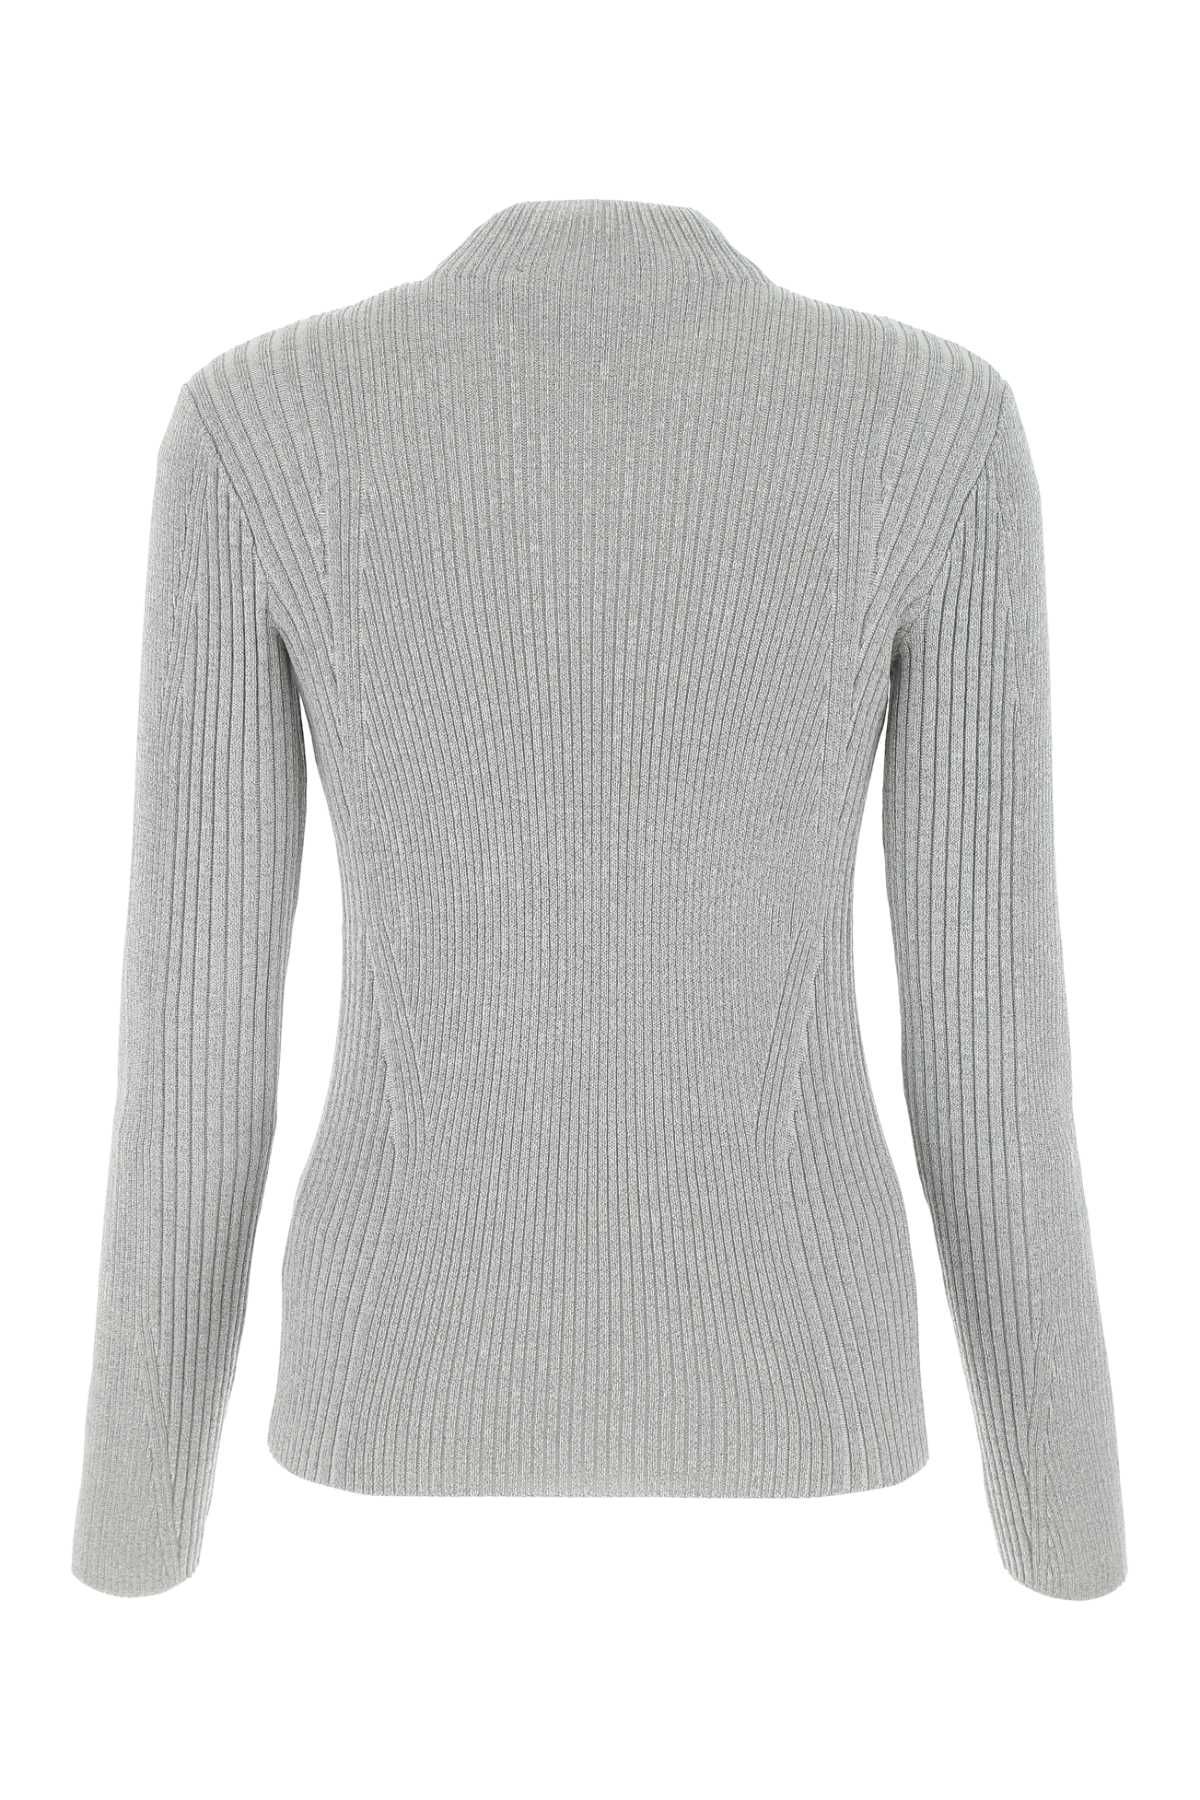 Dion Lee Light Grey Polyester Blend Sweater In Silver